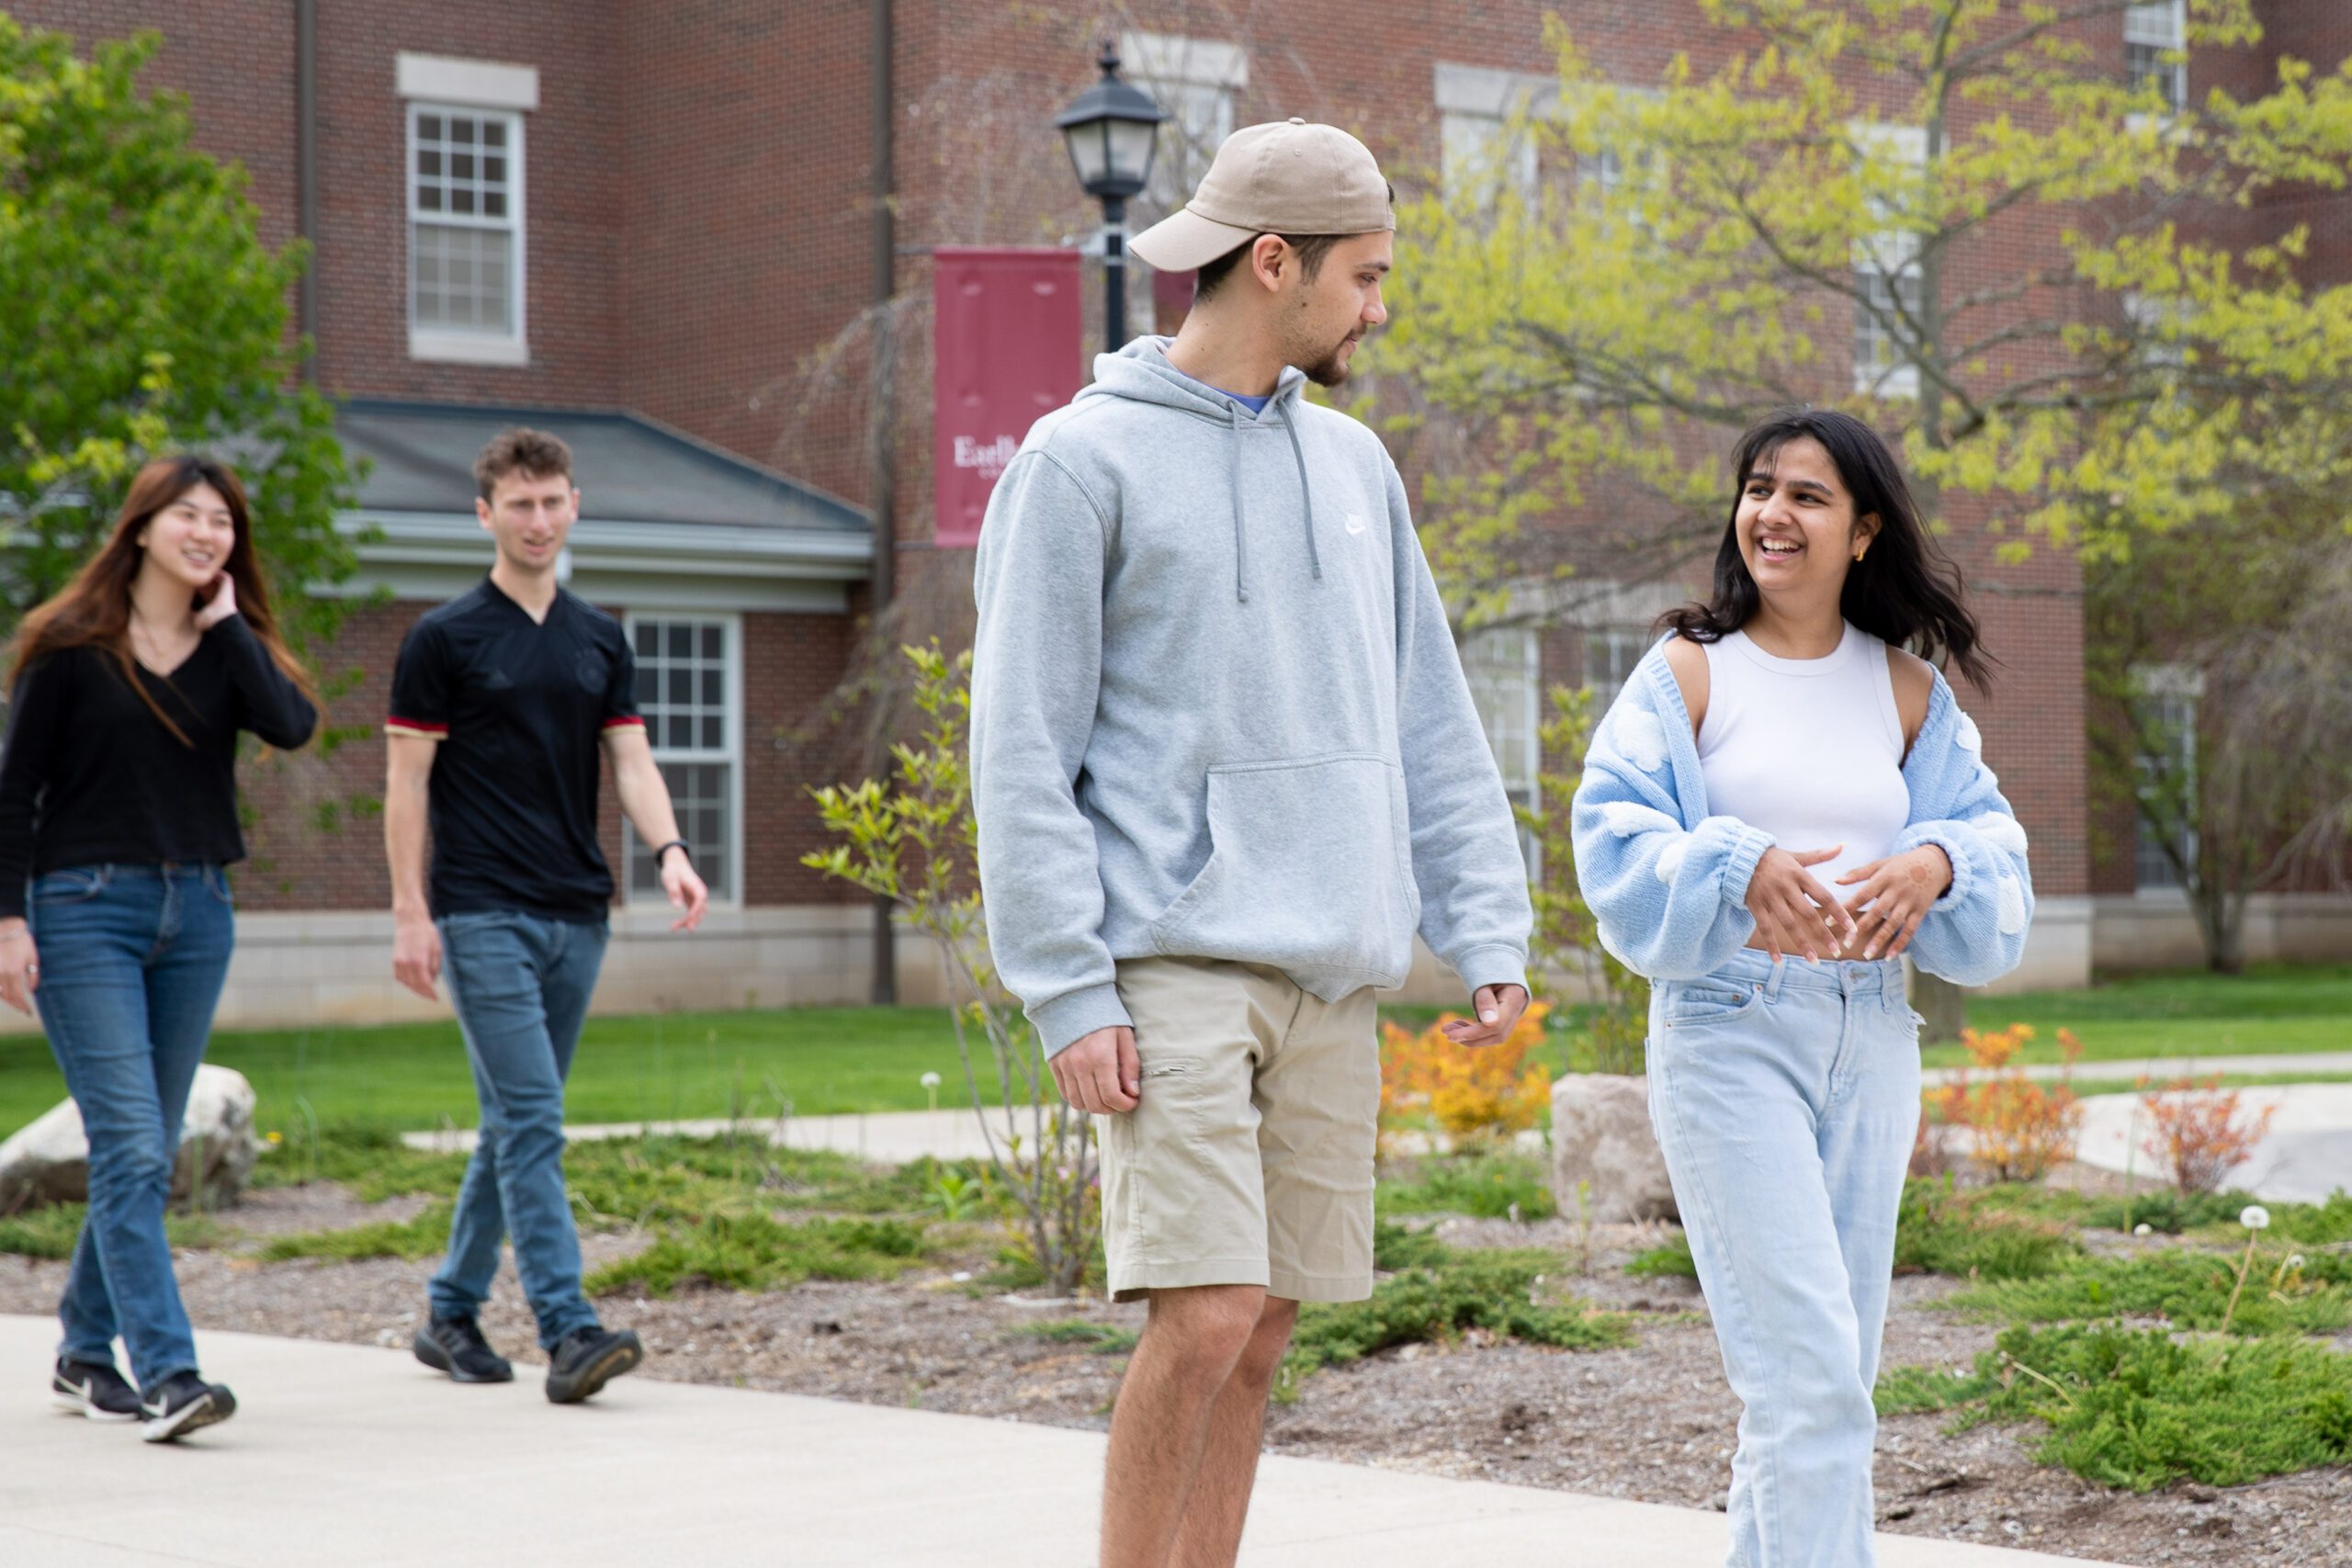 Students walking and smiling as they walk between campus buildings